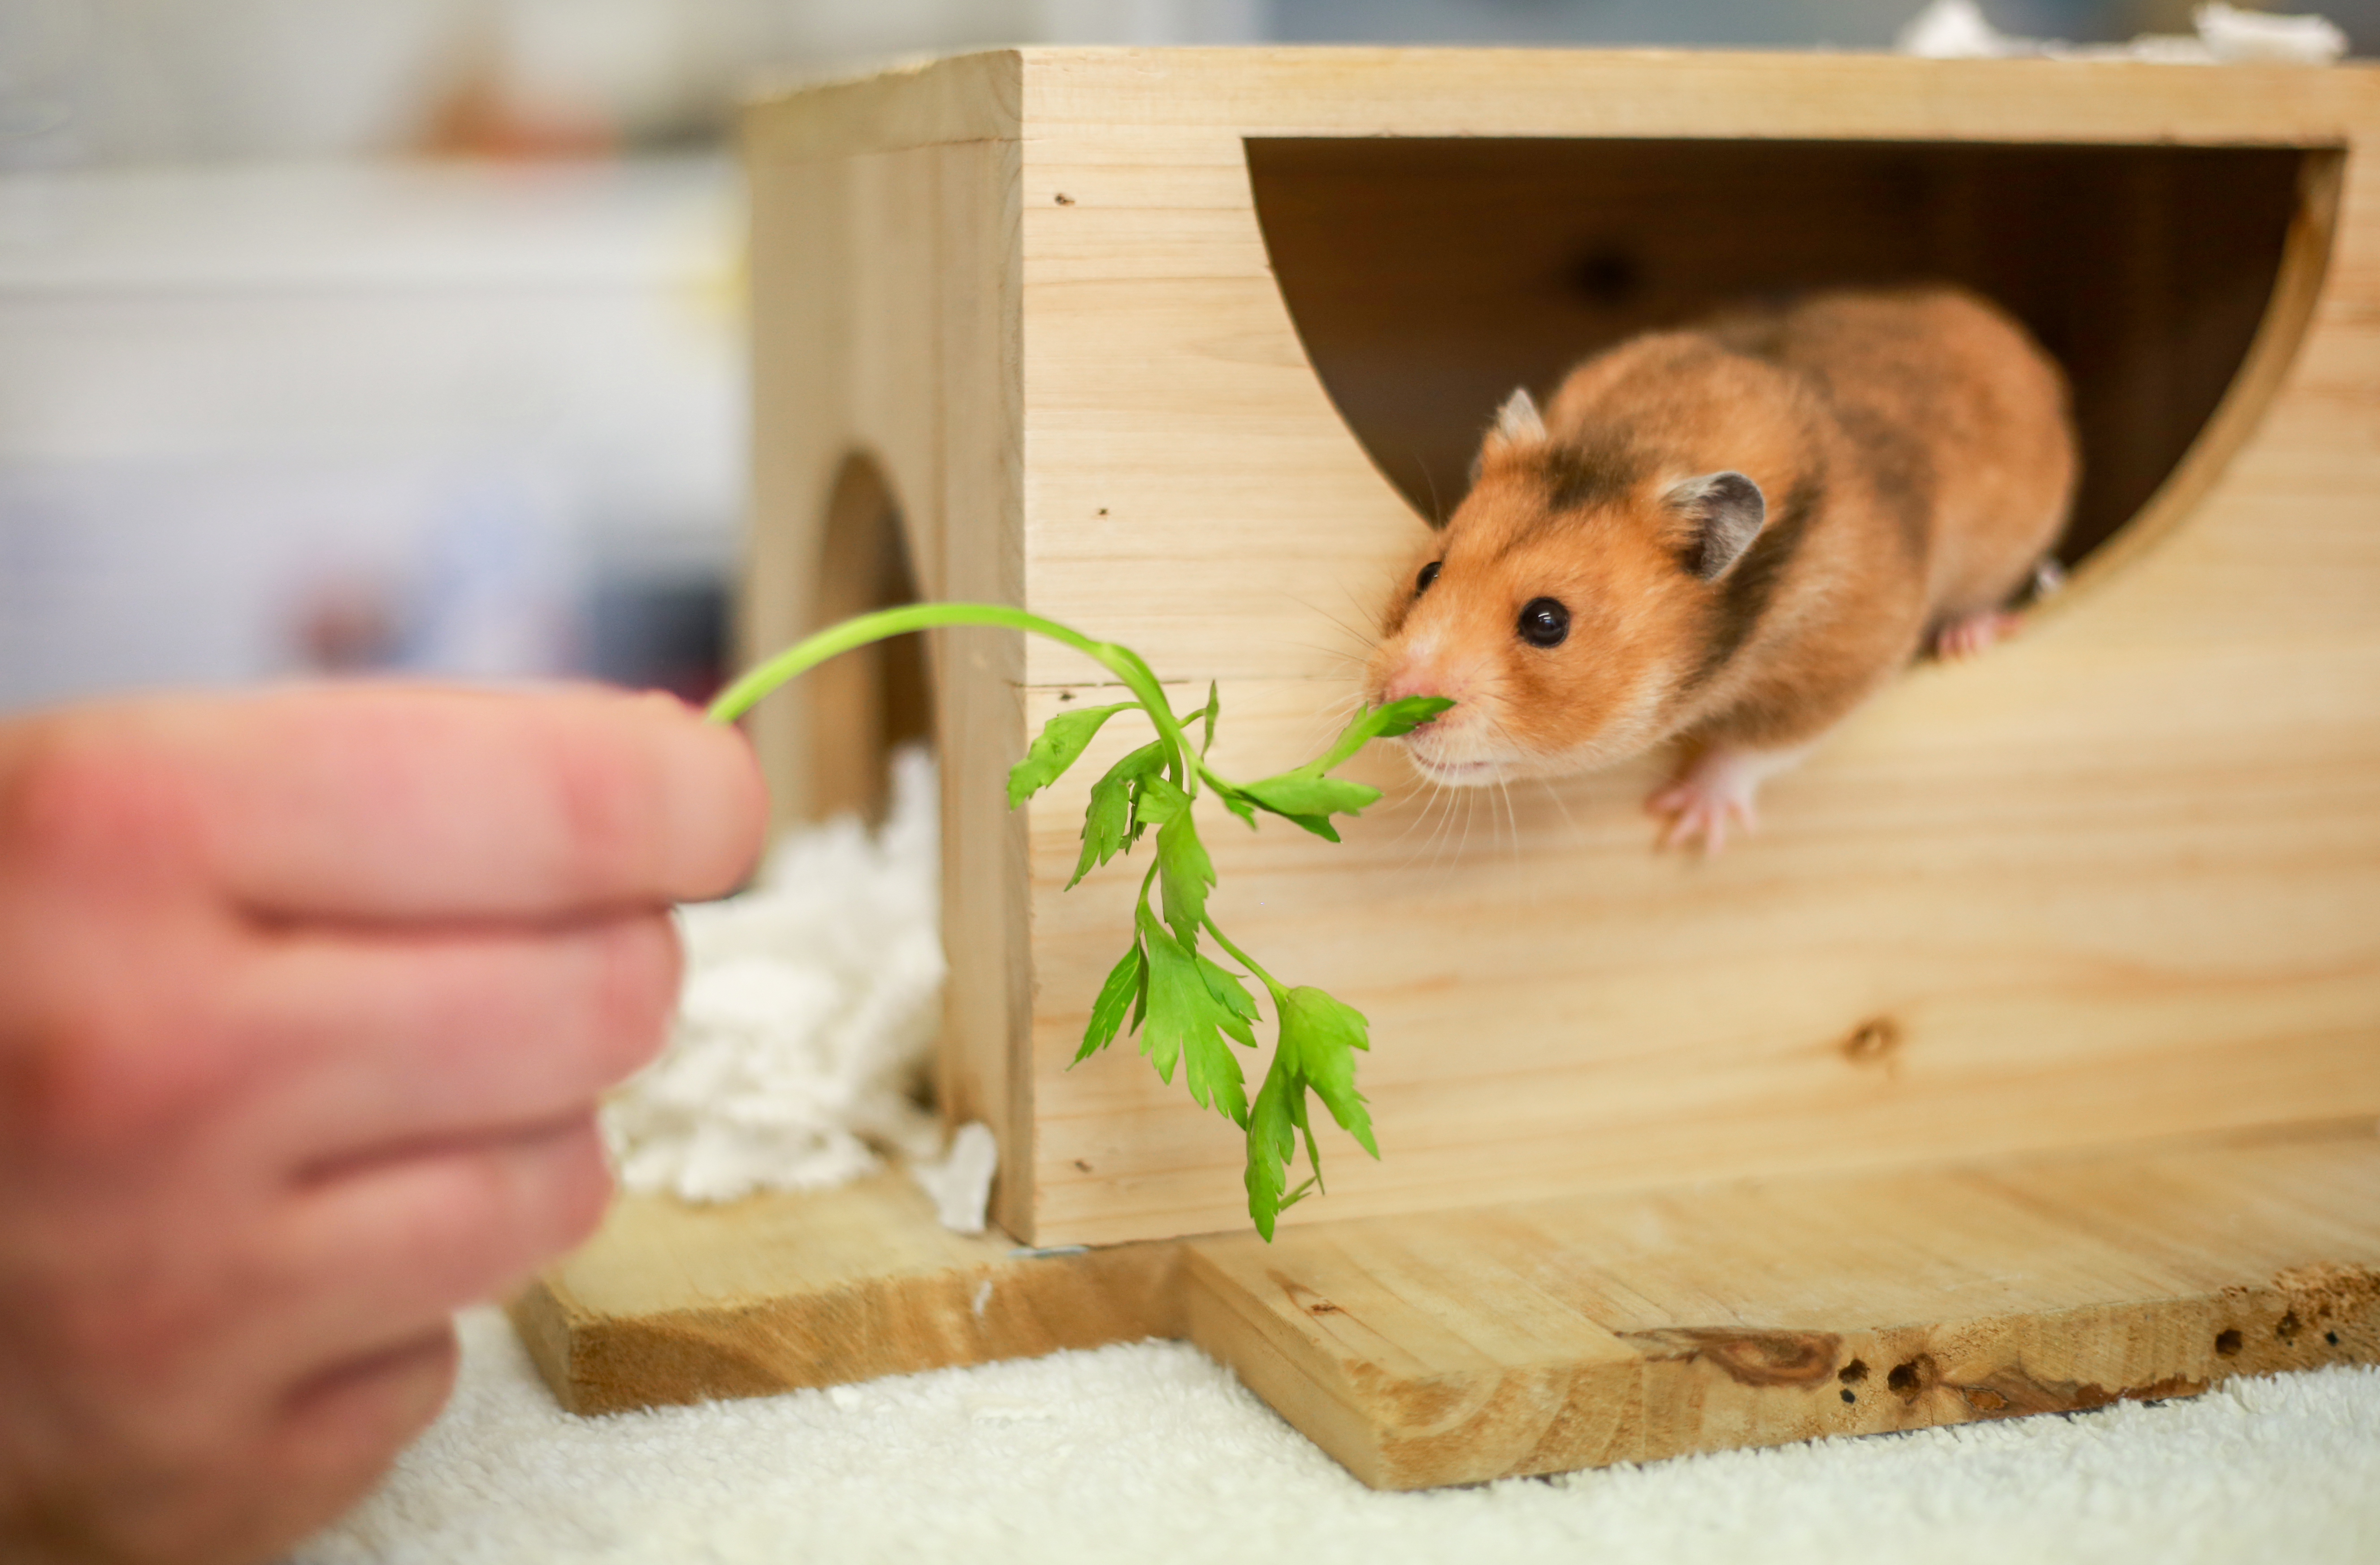 A brown hamster leans out of their wooden hut for some leafy greens.